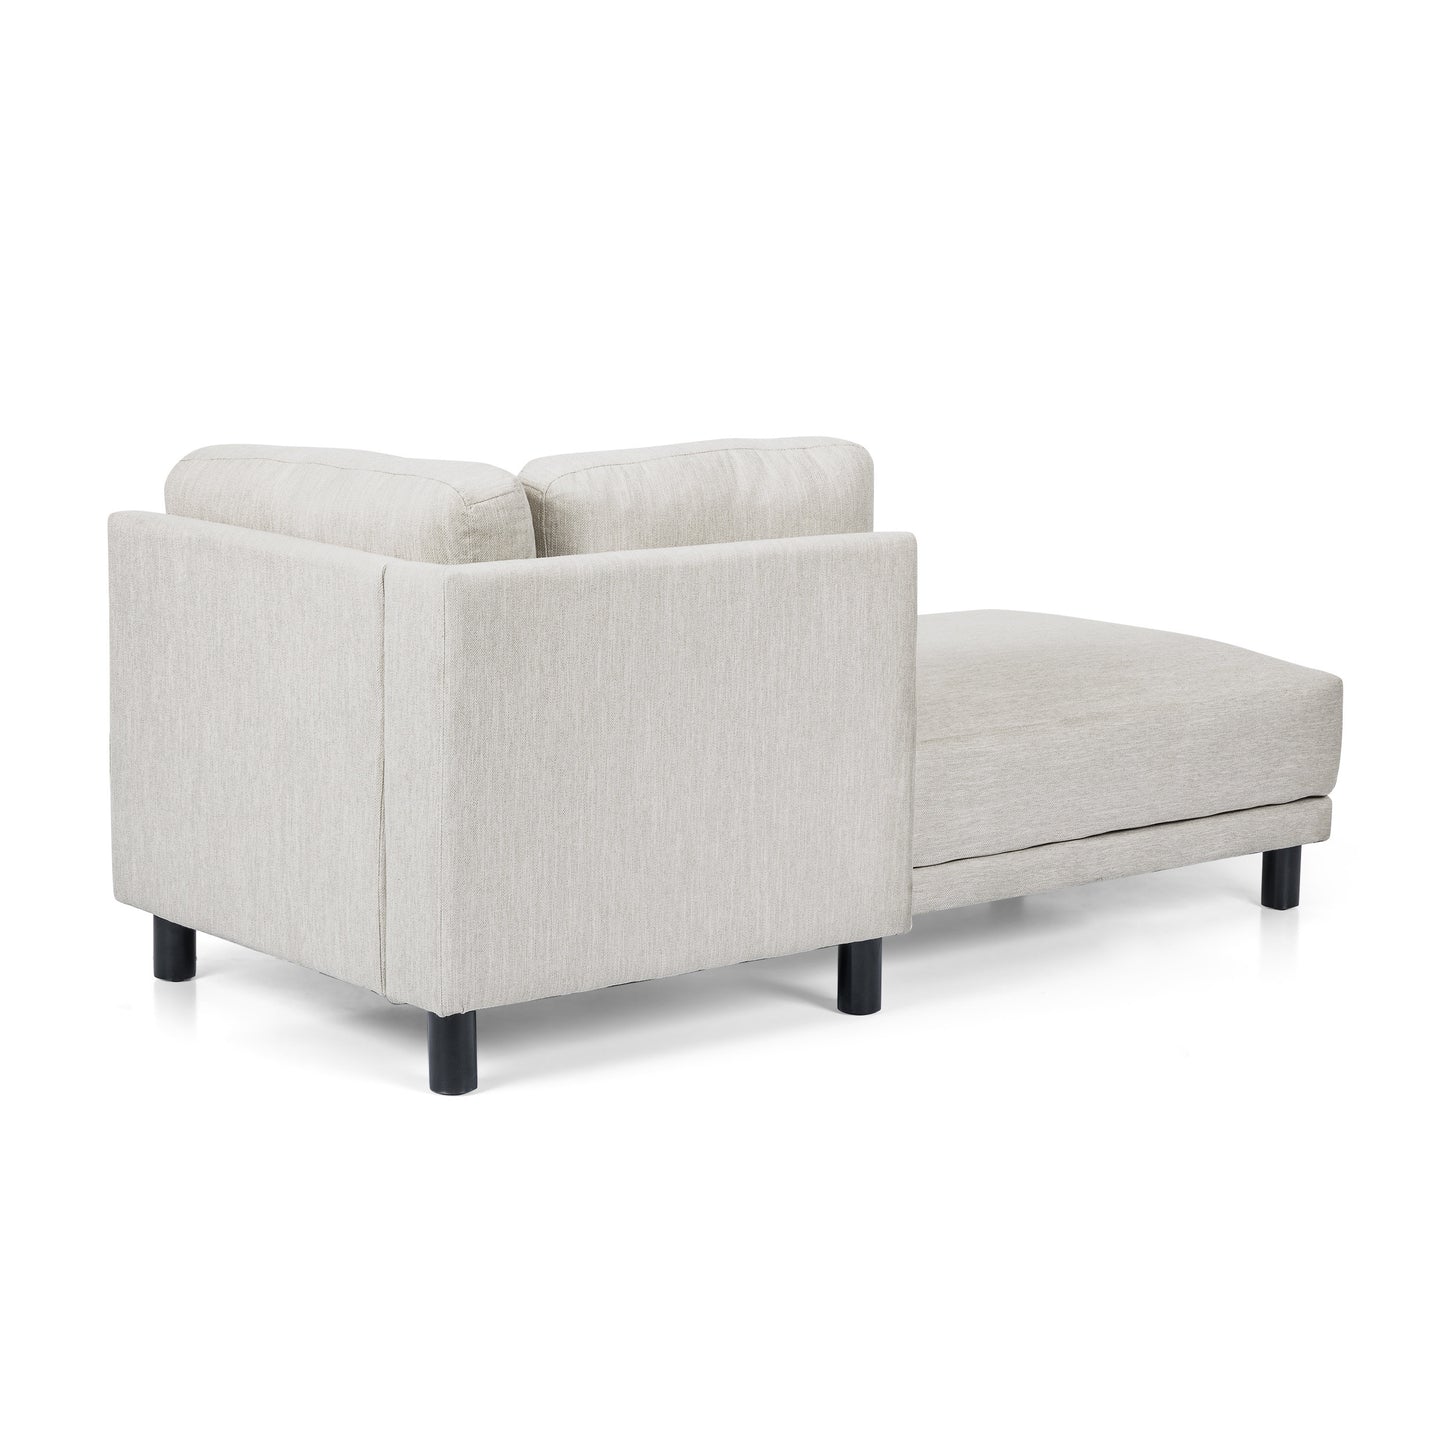 Wellston Contemporary Fabric Upholstered Chaise Lounge